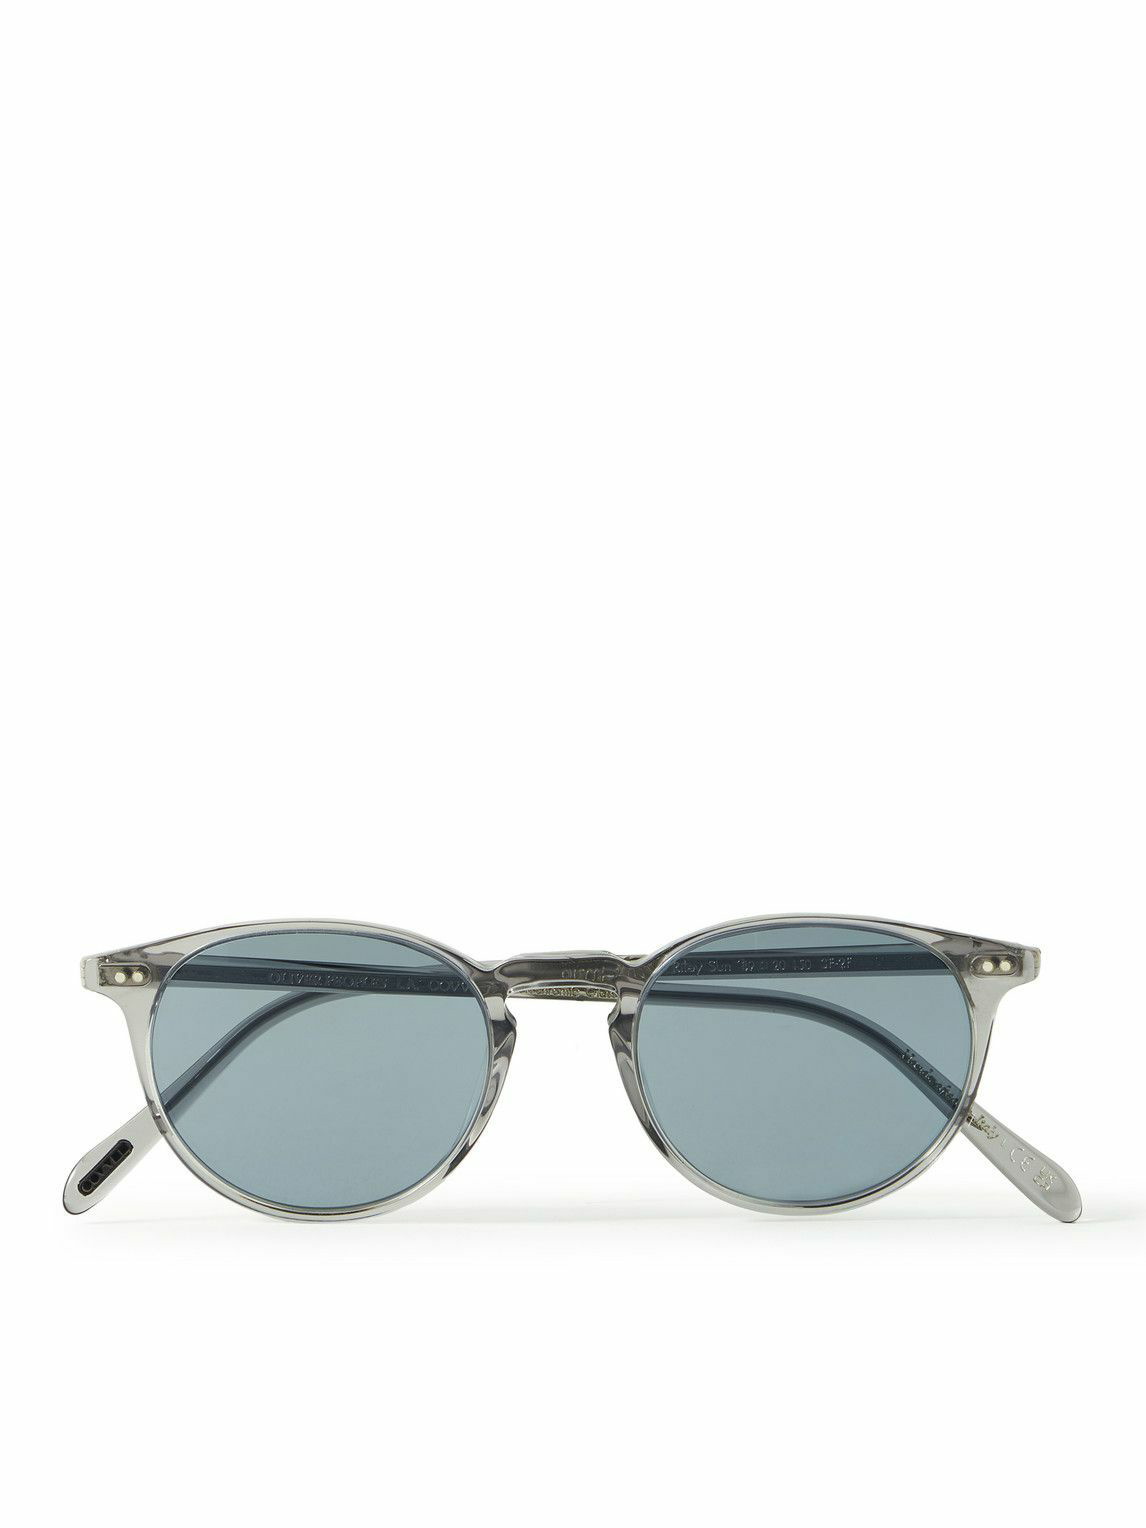 Oliver Peoples - Riley Sun Round-Frame Acetate Sunglasses Oliver Peoples